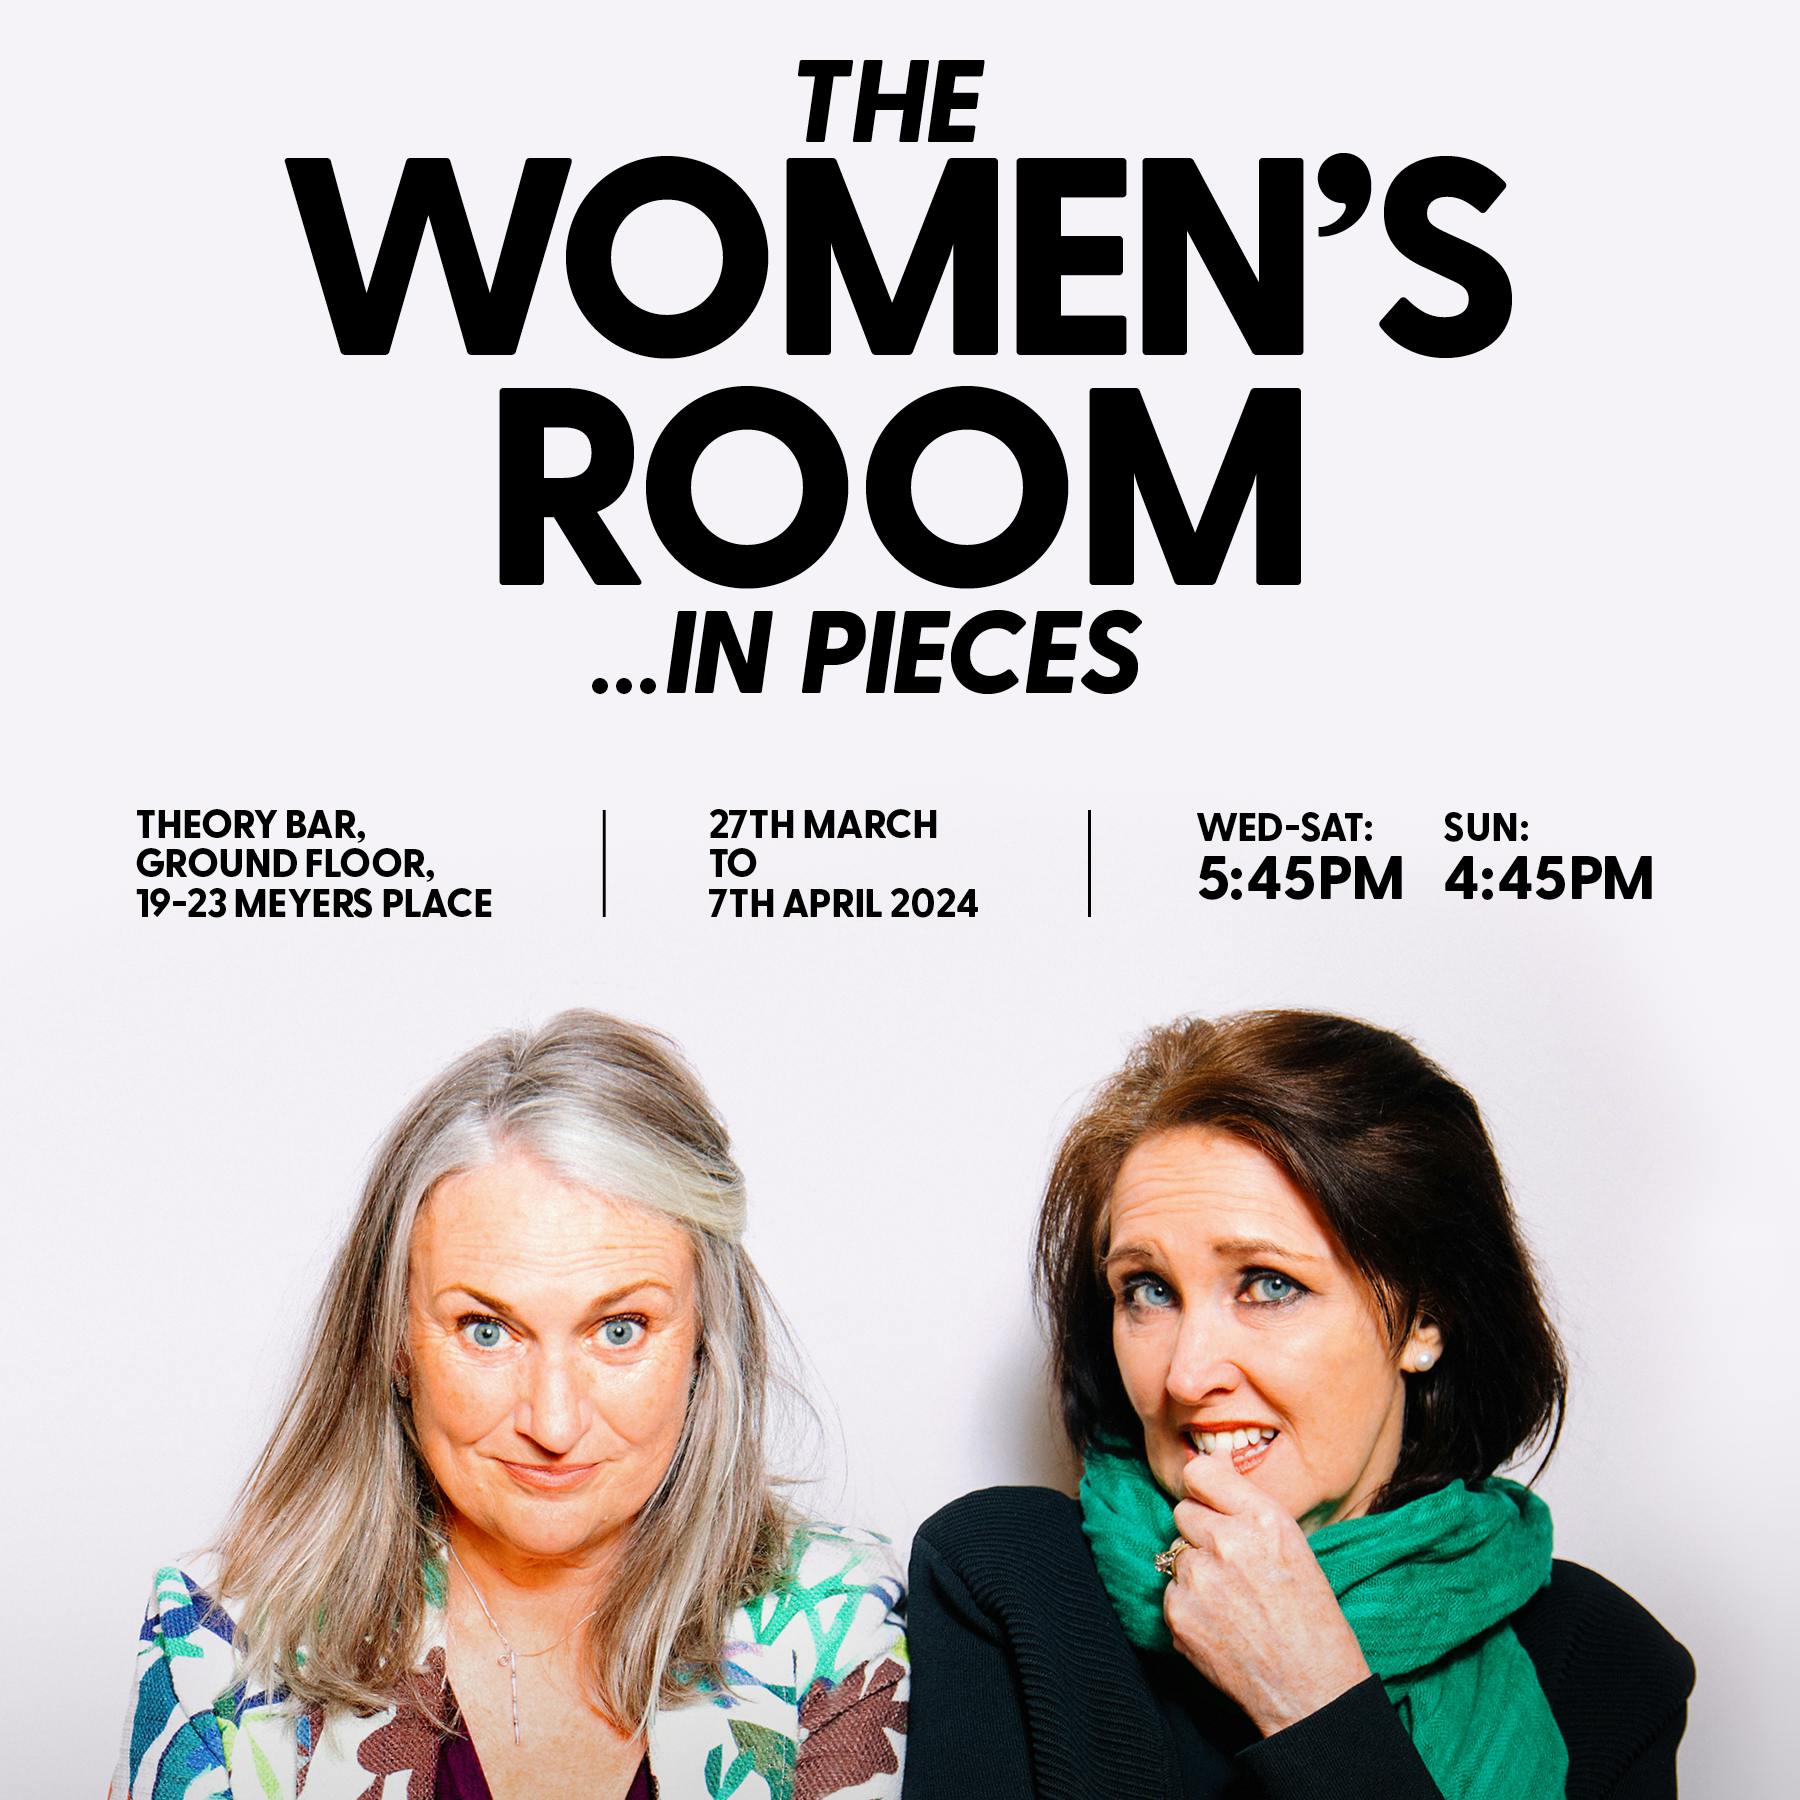 The Women's Room - In Pieces